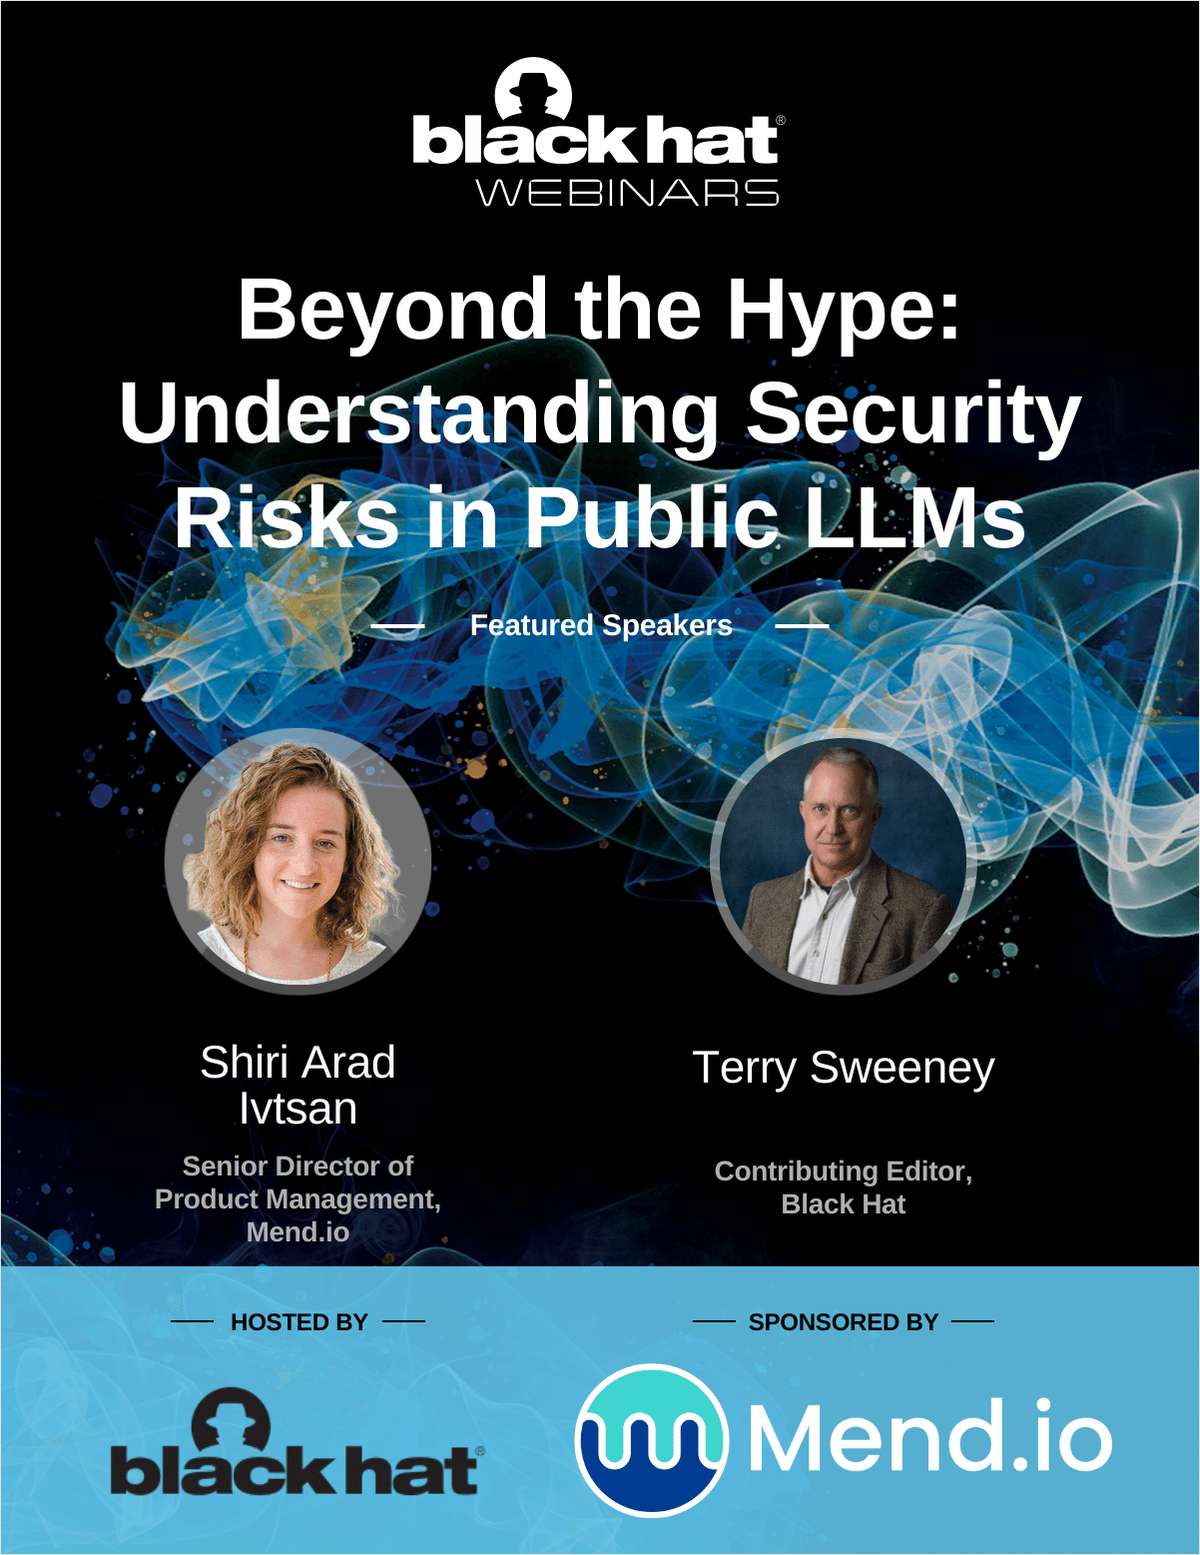 Beyond the Hype: Understanding Security Risks in Public LLMs